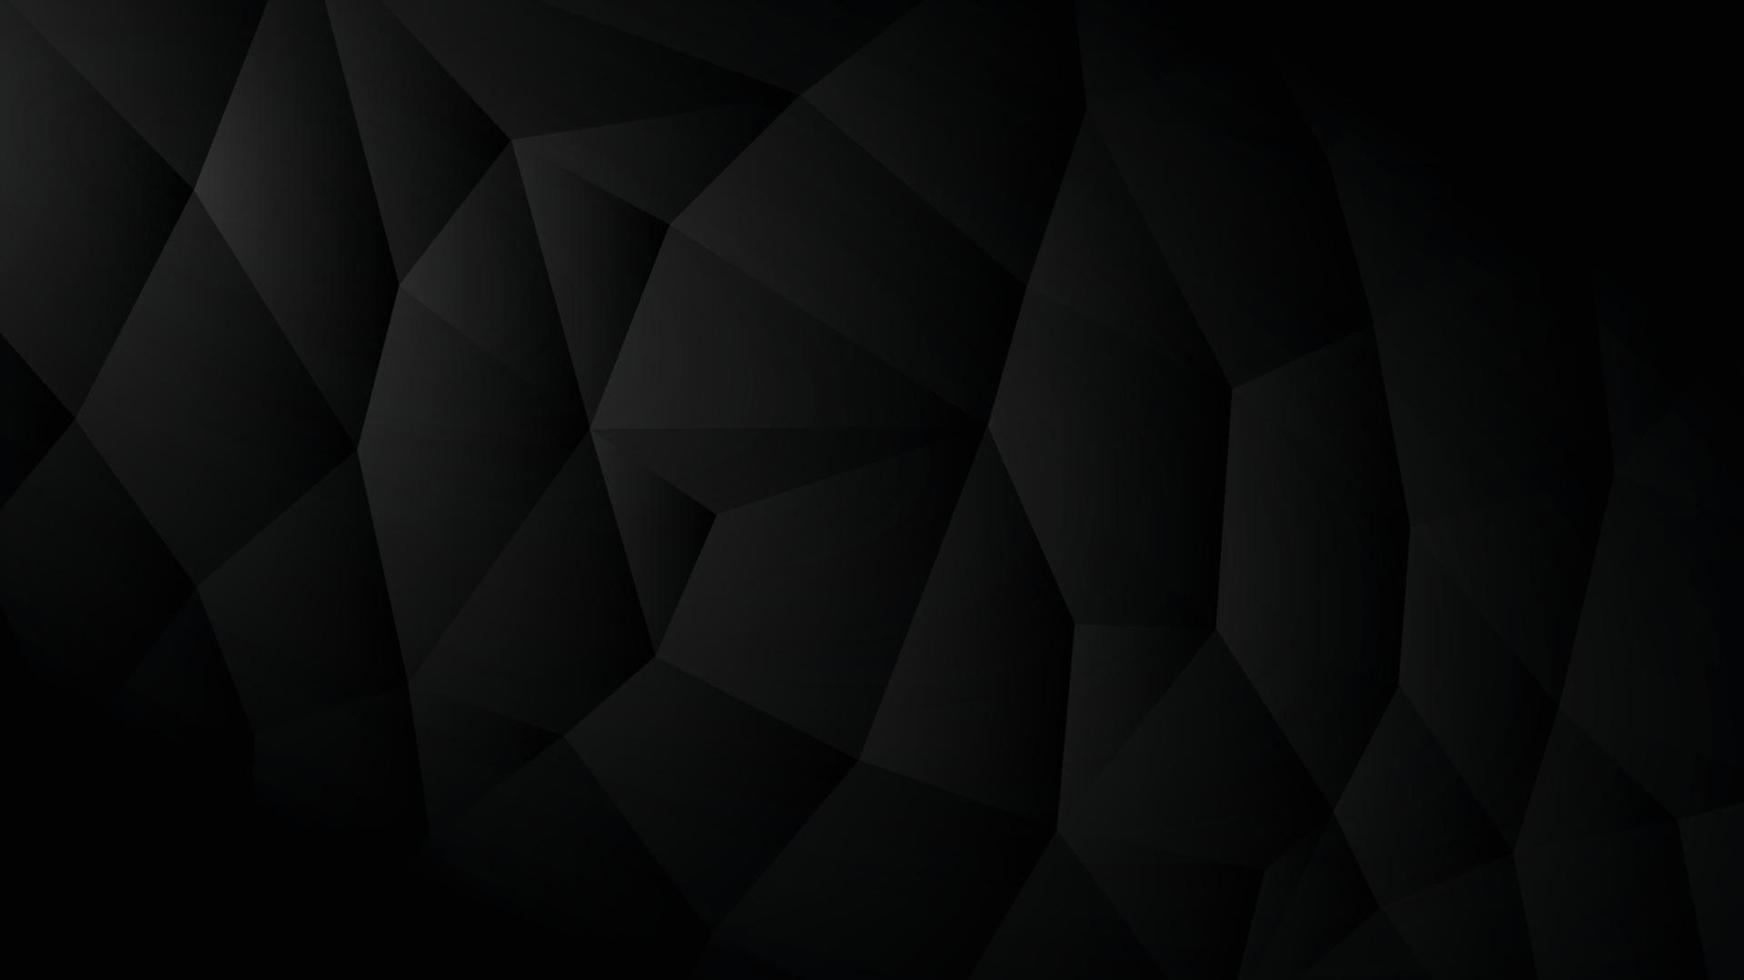 Background image with surface of triangles connected in a dark tone. vector